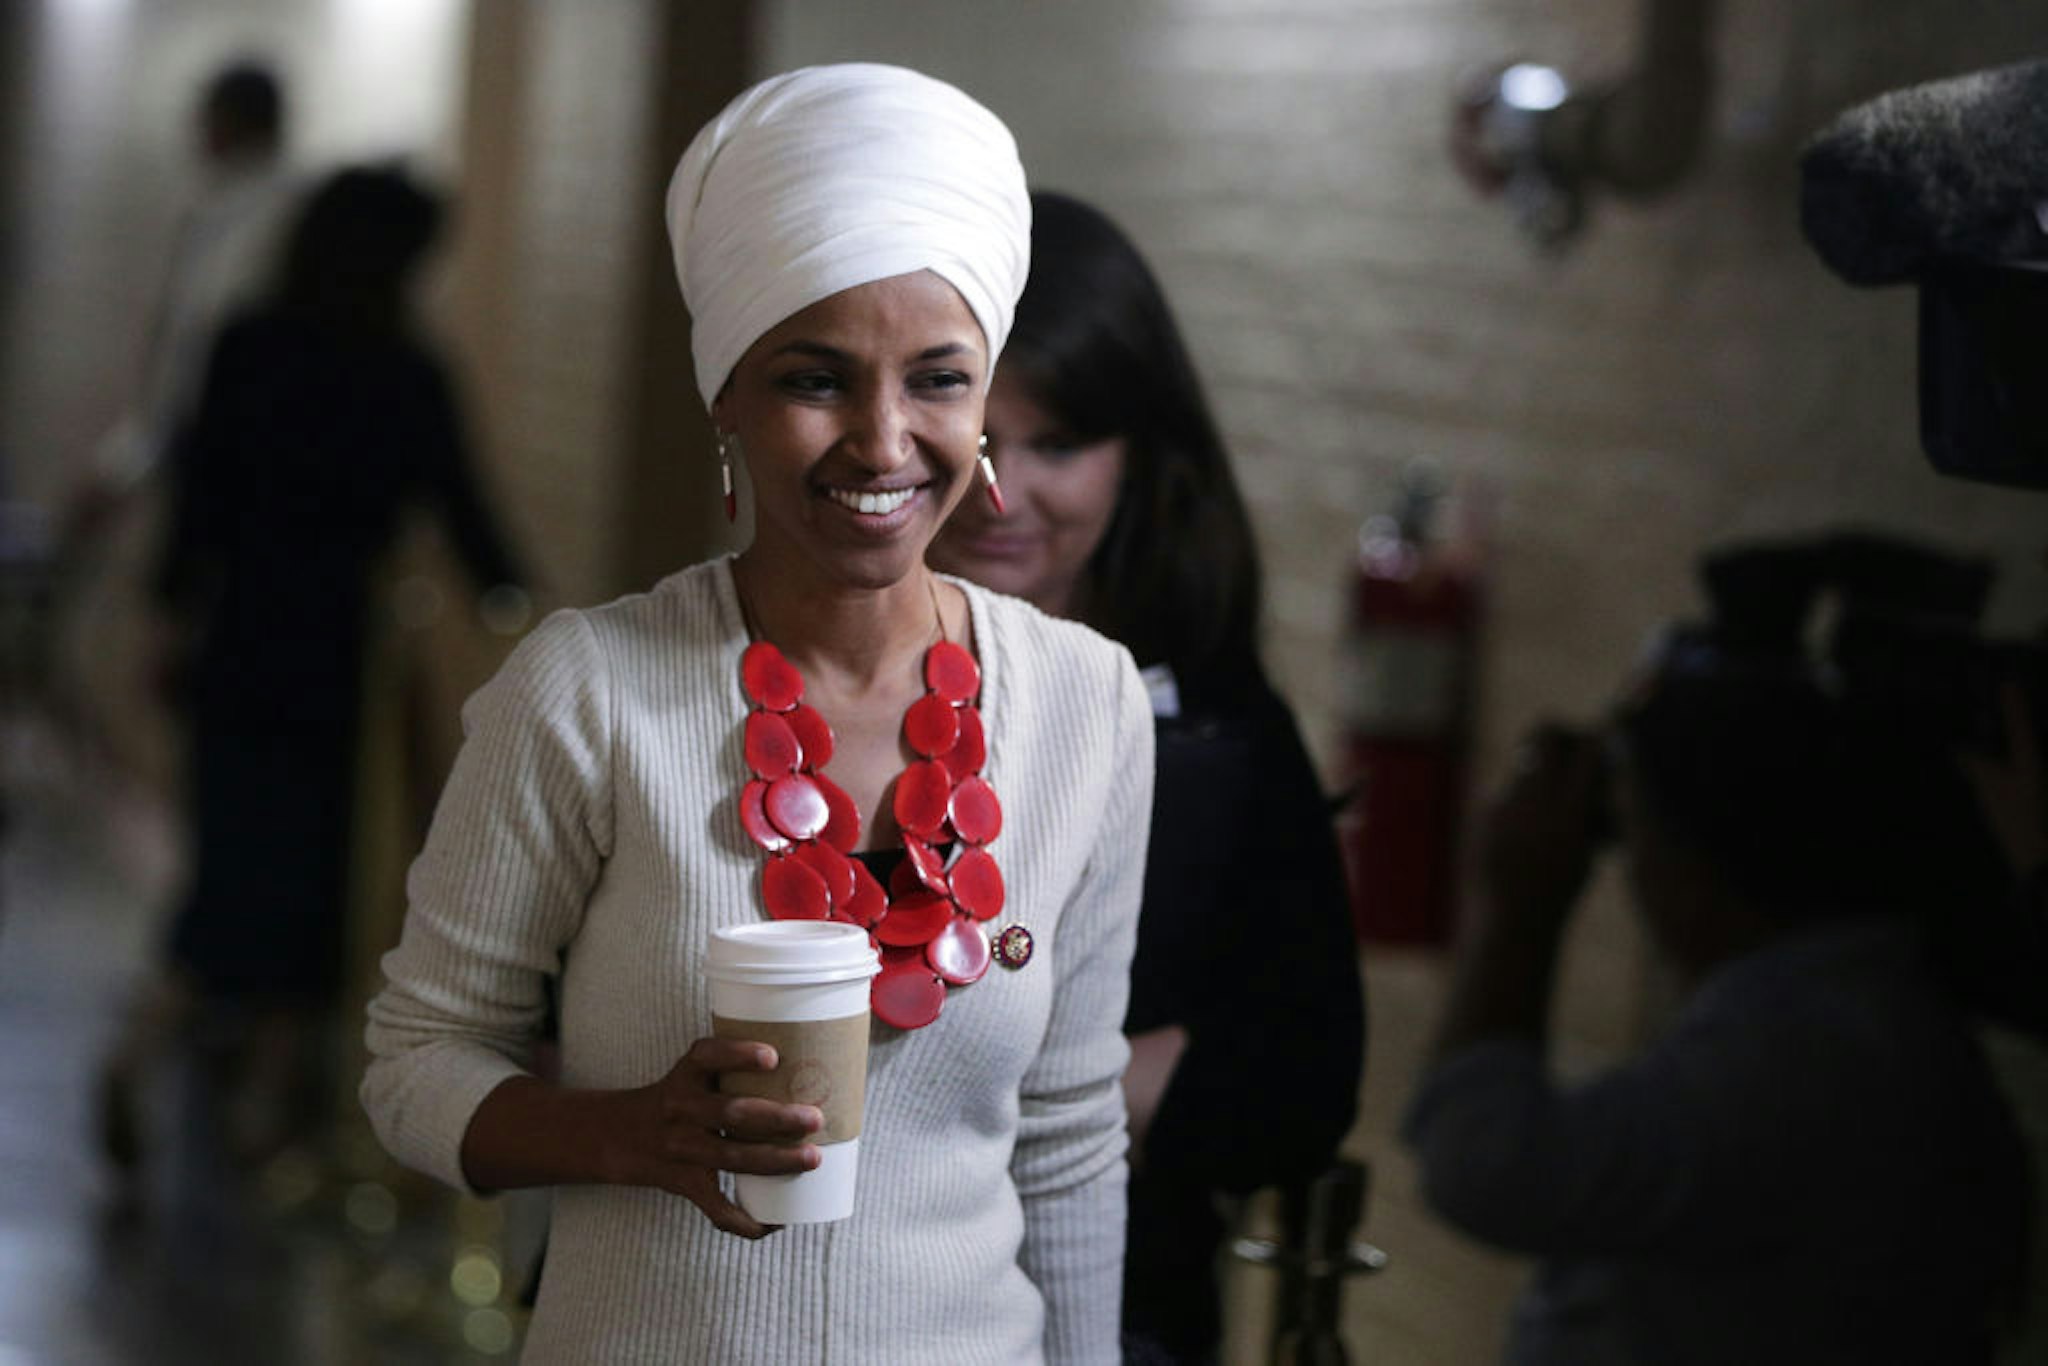 Rep. Ilhan Omar arrives at a House Democratic Caucus meeting at the U.S. Capitol September 25, 2019